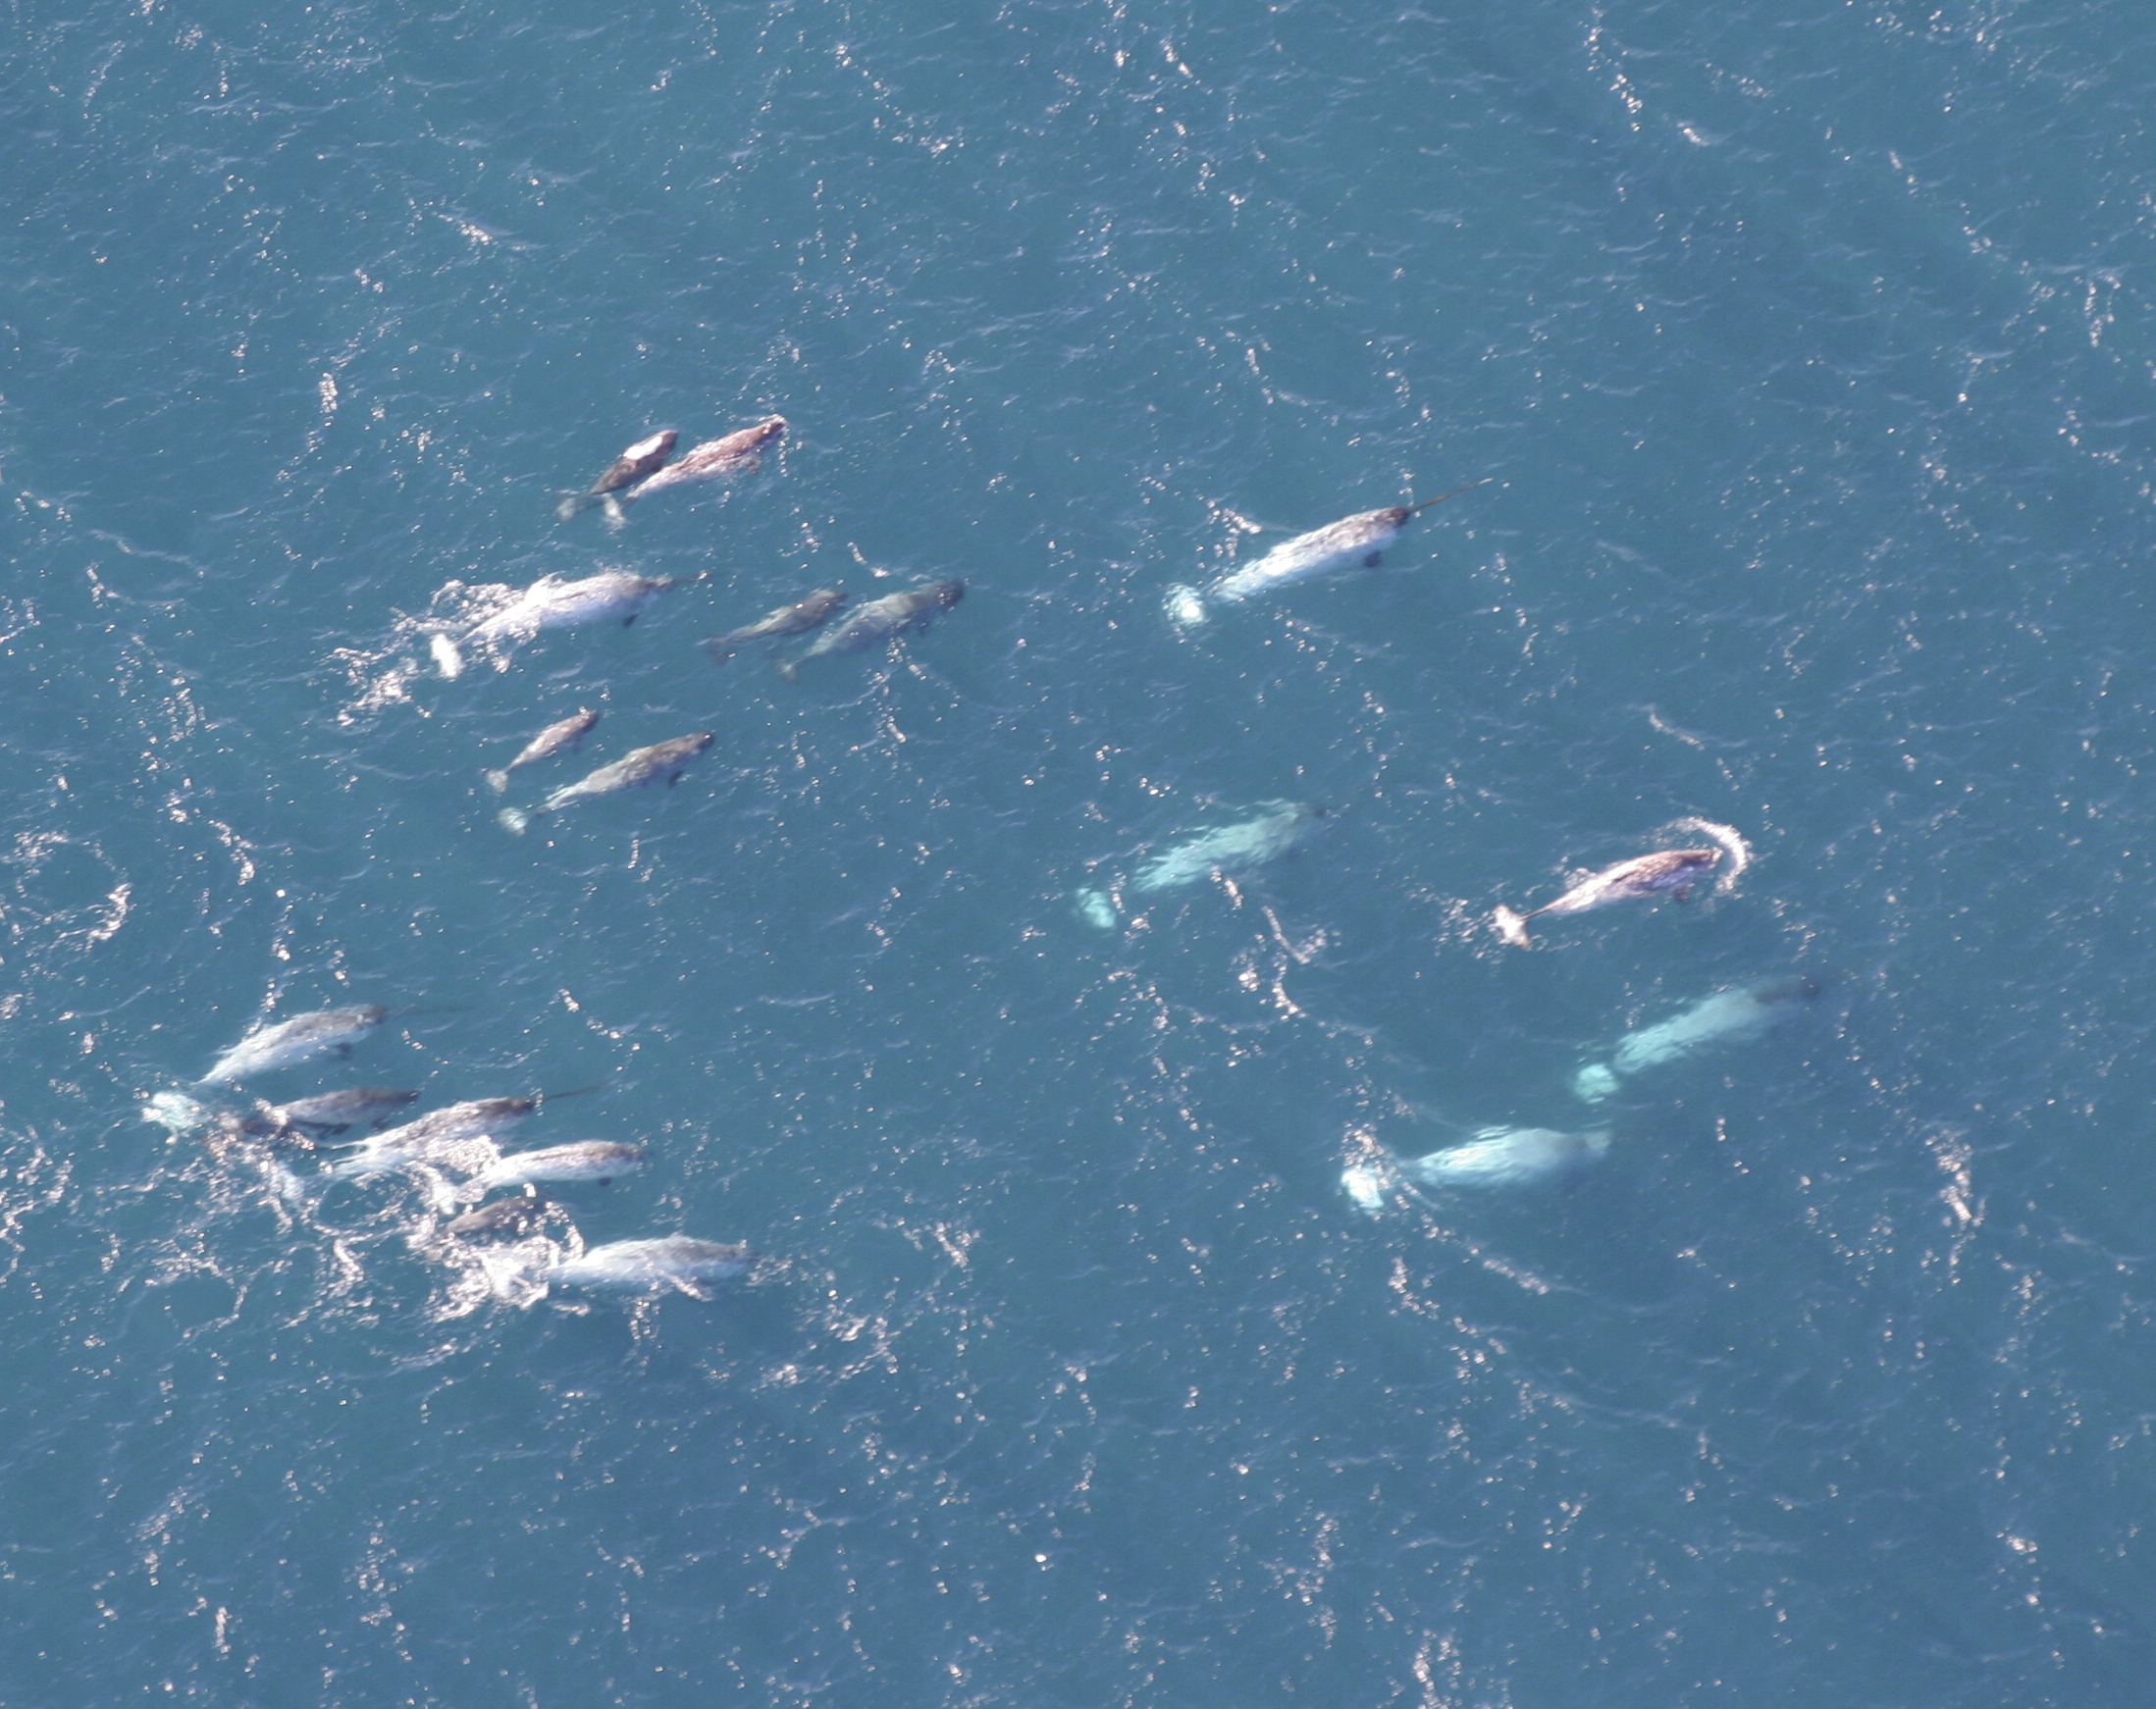 In a photo provided by the National Oceanic and Atmospheric Administration, a pod of narwhals surfaces in the waters off northern Canada in August, 2005. Researchers tracked narwhals and found that they have exceptional echolocation abilities,  reconstructing their underwater world with more resolution that most other animals on the planet. (Kristin Laidre / NOAA via The New York Times)